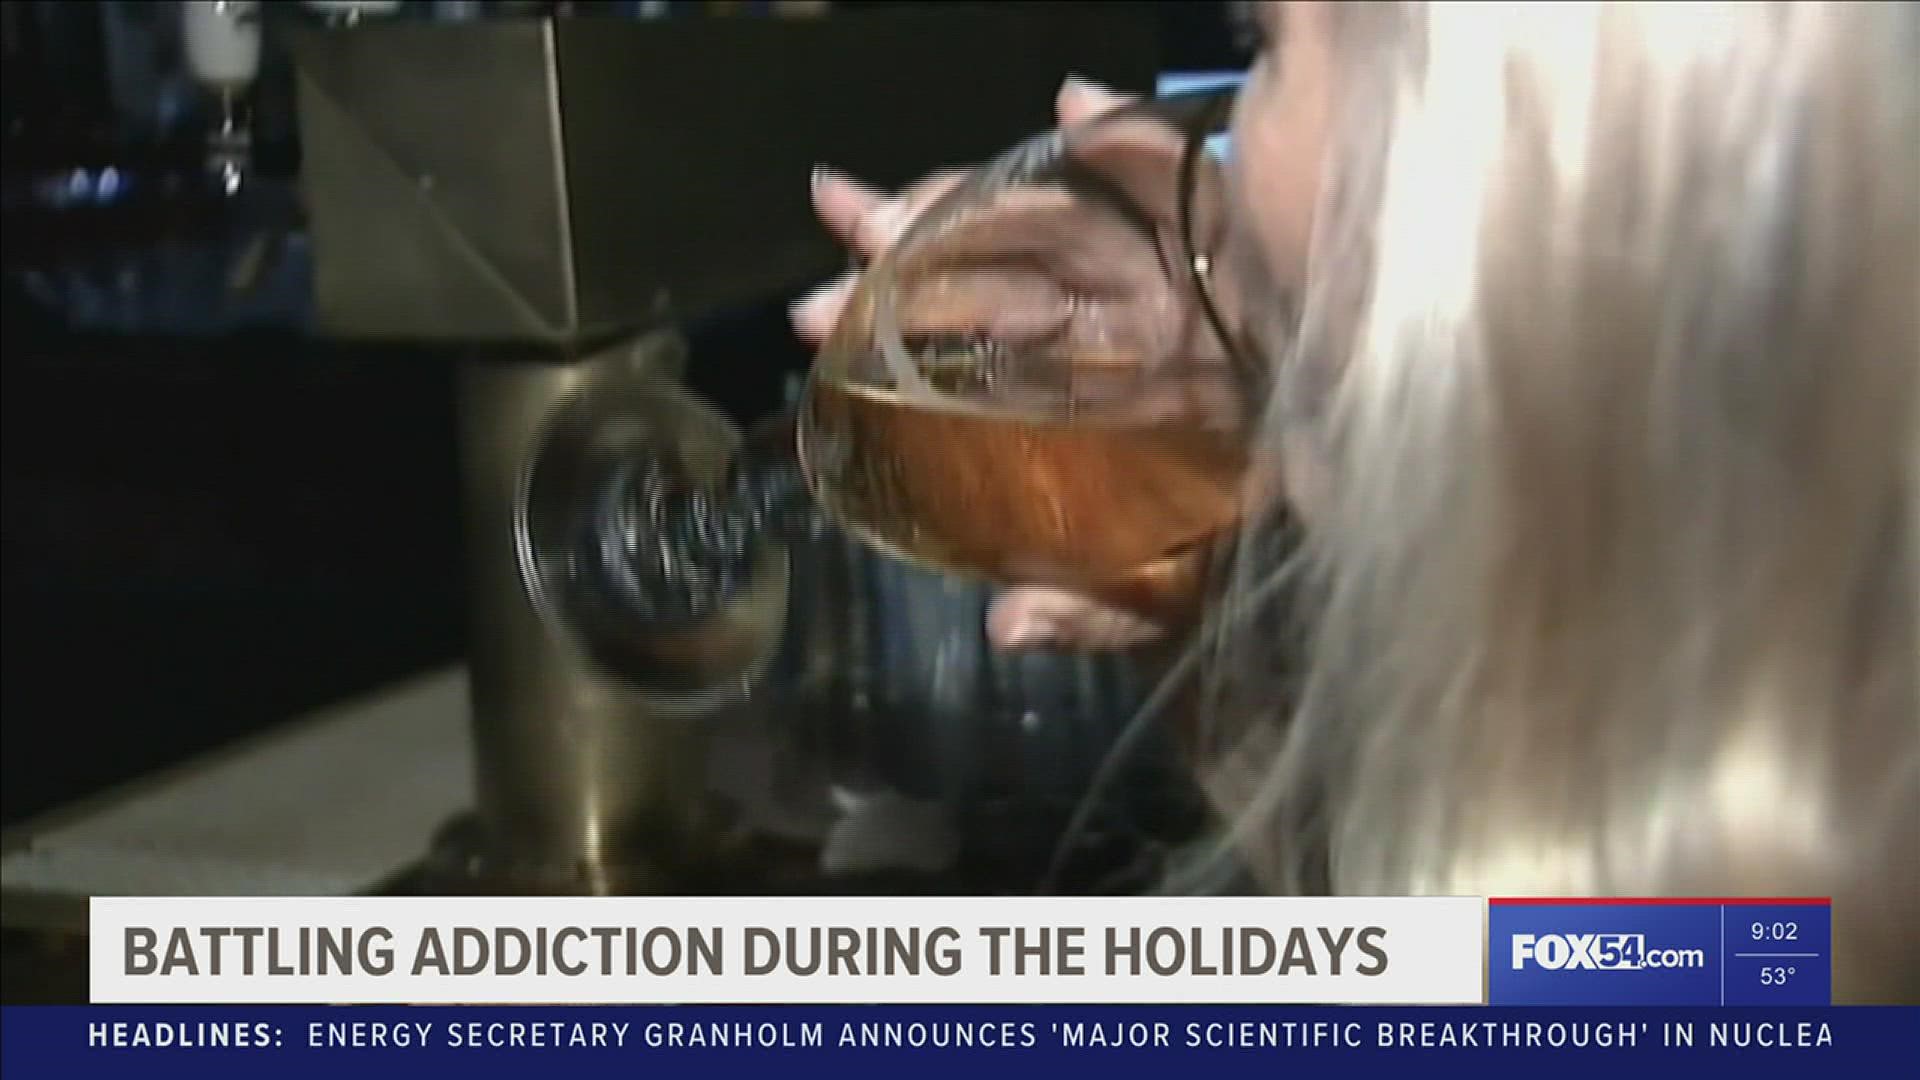 Substance abuse is a disease that affects many, and those who are on the road to recovery, may face setbacks during this holiday season.